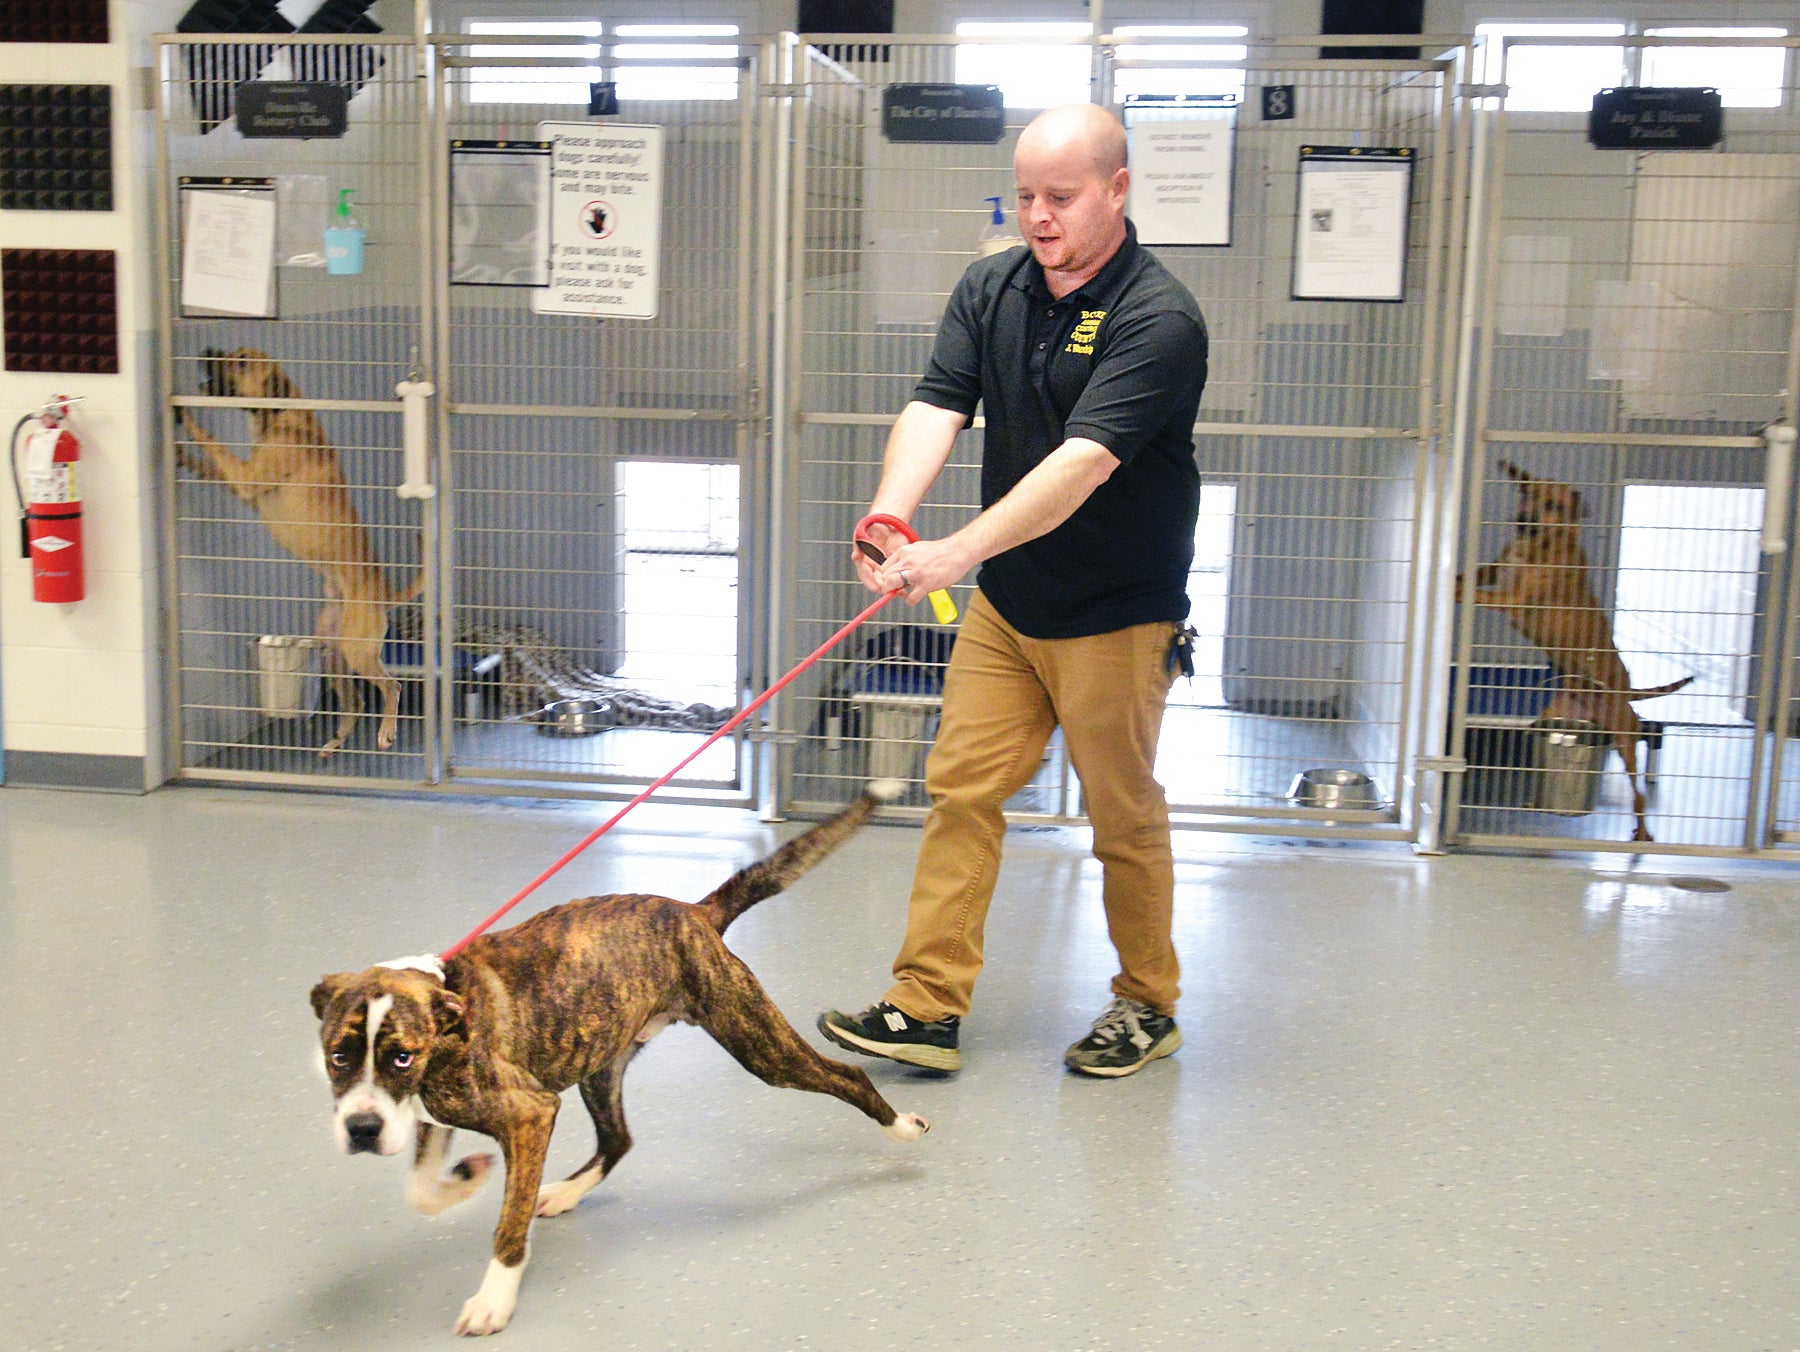 Animal control officer says the good in people help balance out tough parts  of job - The Advocate-Messenger | The Advocate-Messenger